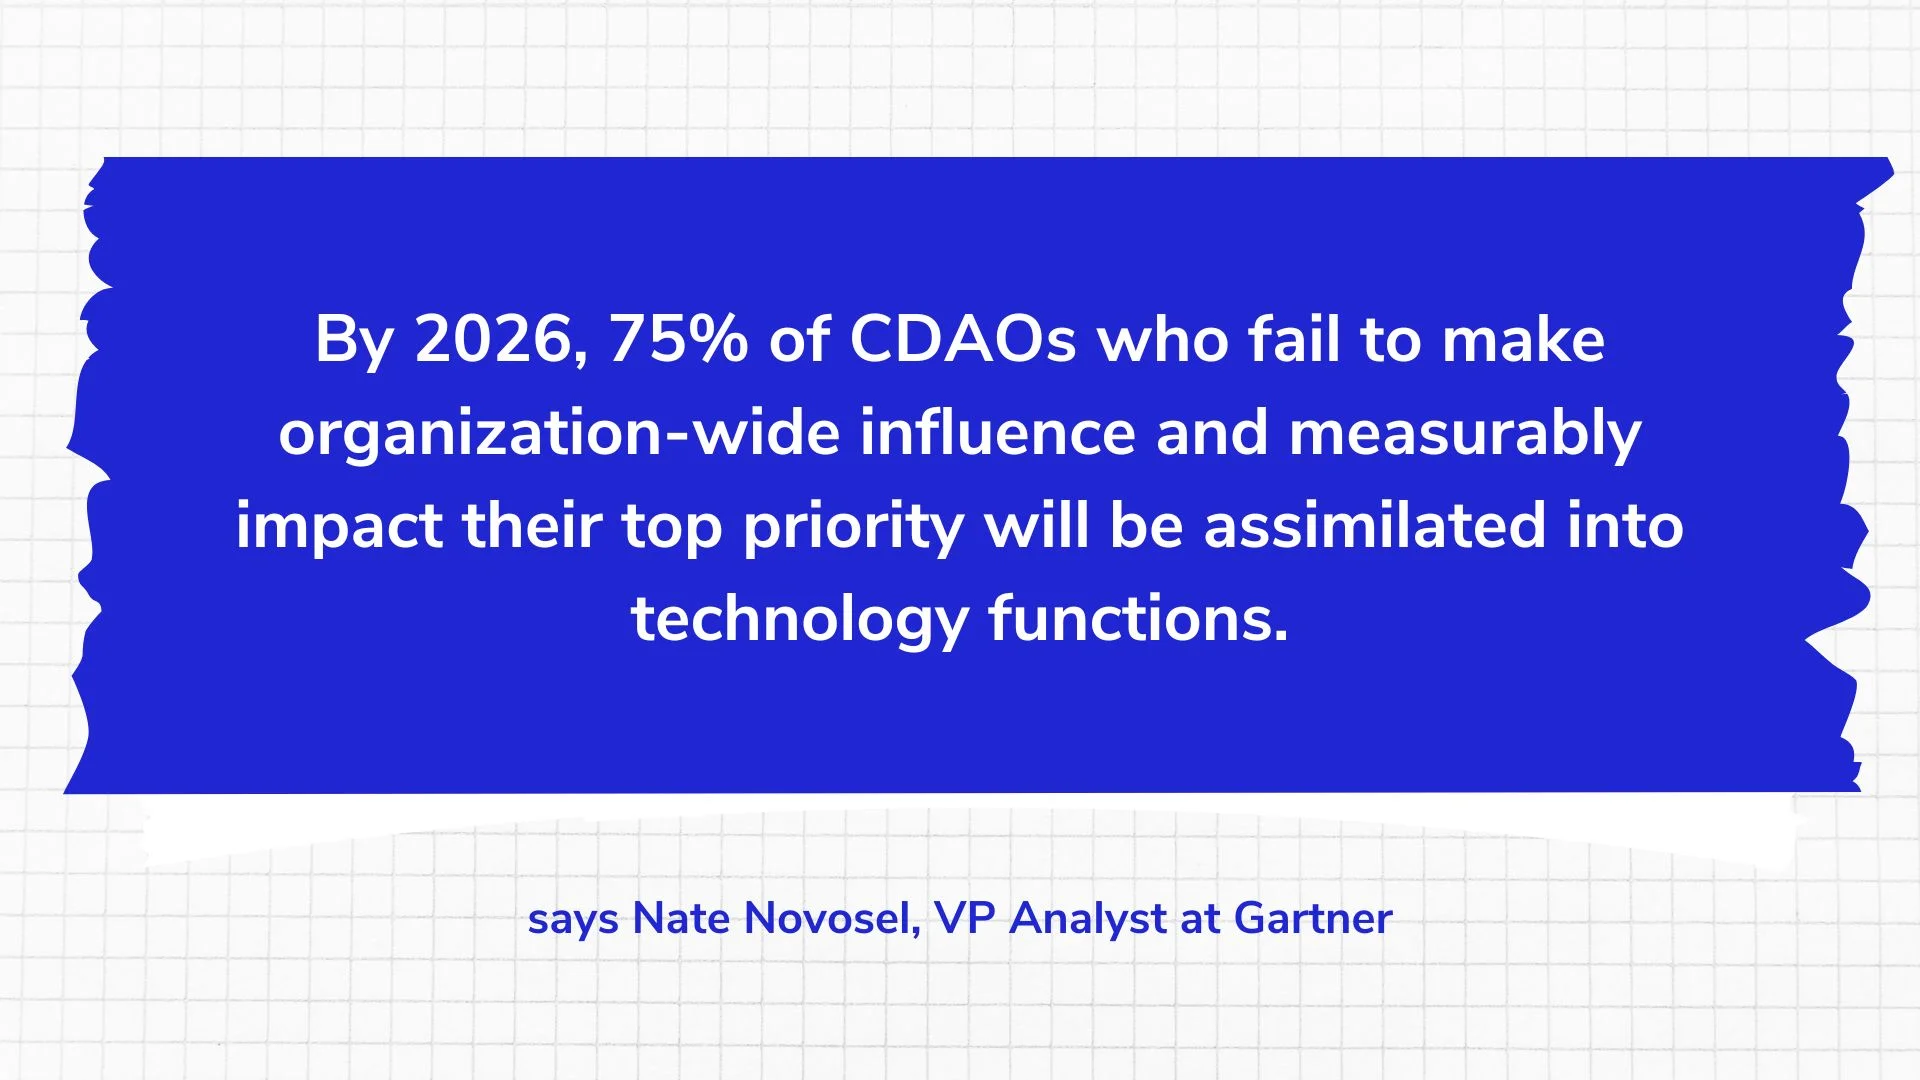 By 2026, 75% of CDAOs who fail to make organization-wide influence and measurably impact their top priority will be assimilated into technology functions.